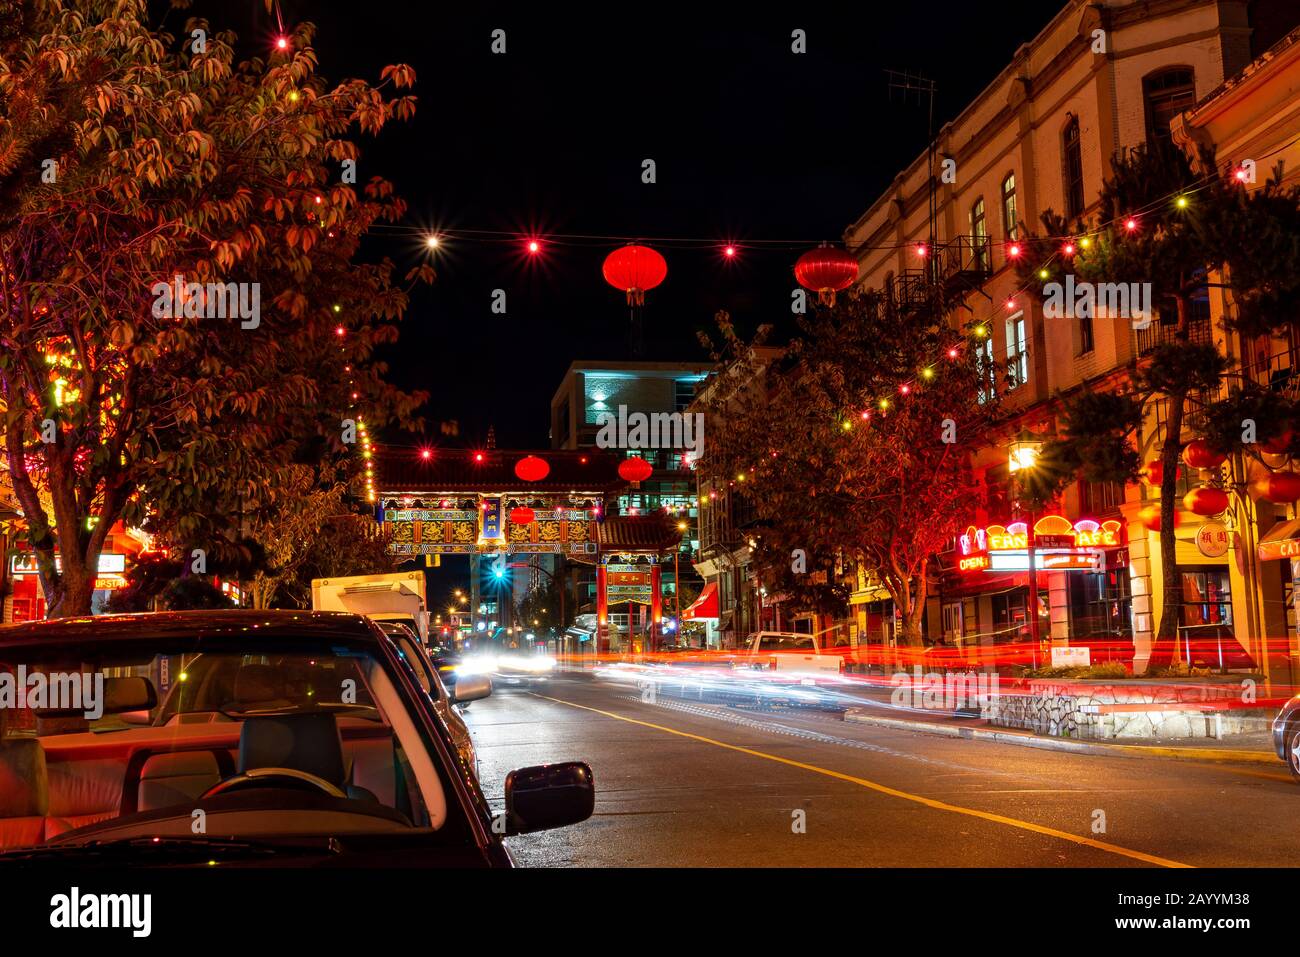 Victoria British Columbia Canada October 24 2012: China town at night with light streaks and gate in the background Stock Photo